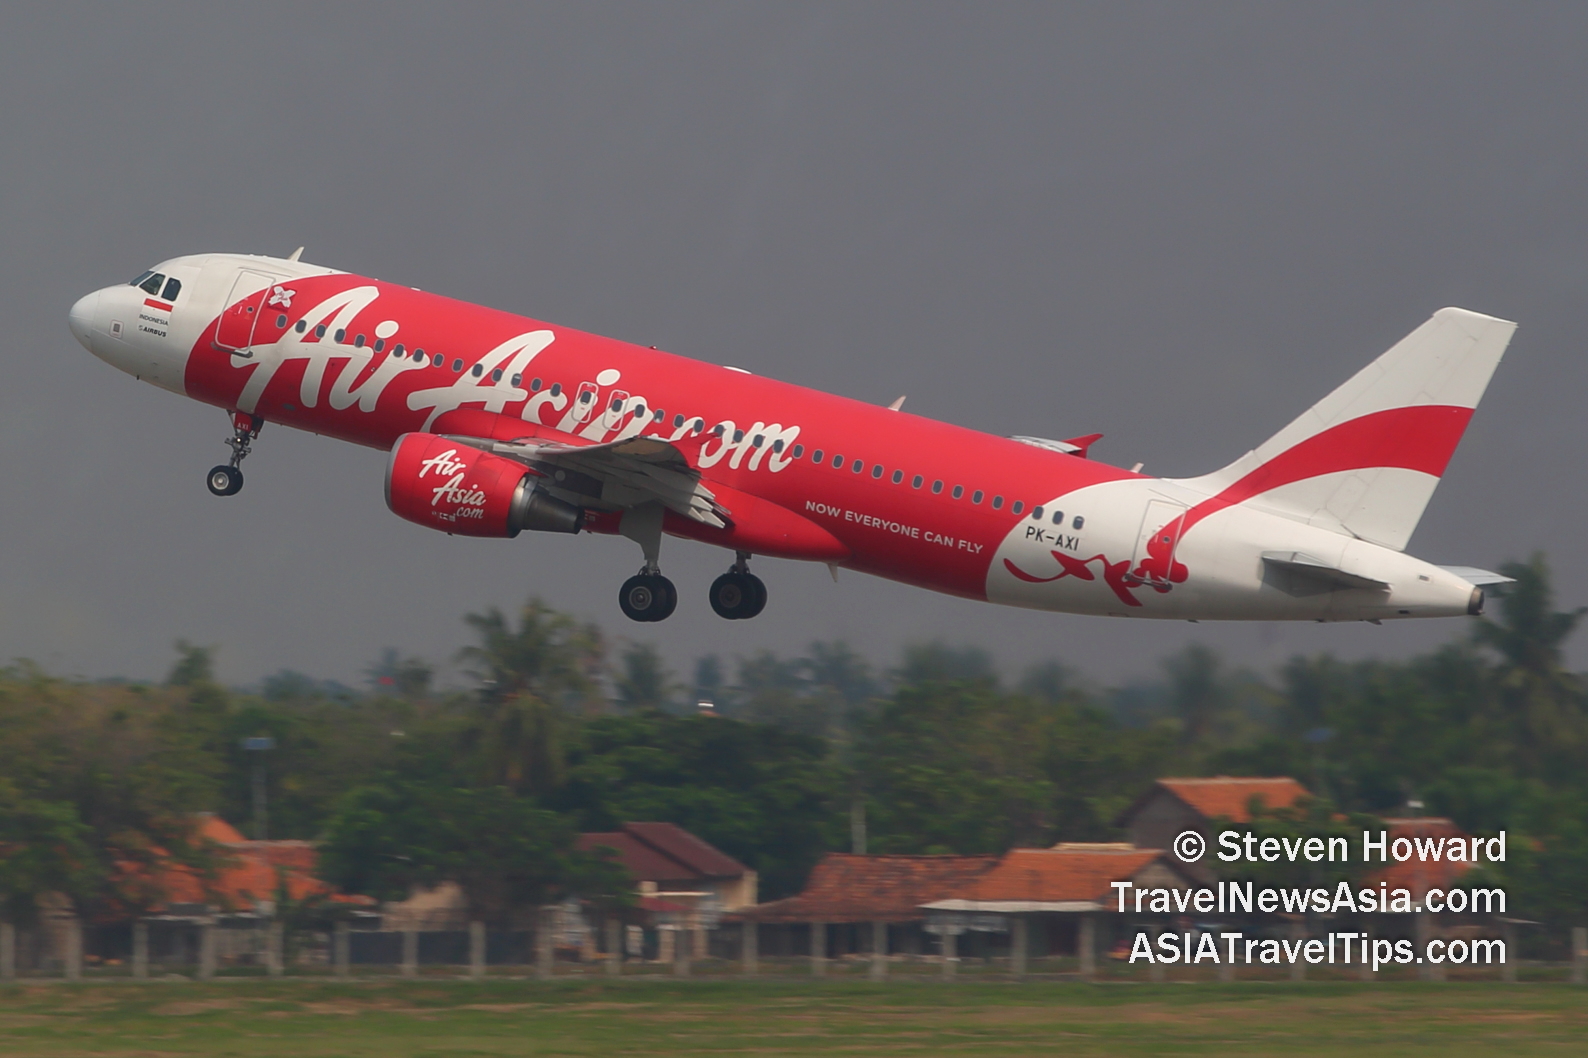 Air Asia Indonesia A320 reg: PK-AXI. Picture by Steven Howard of TravelNewsAsia.com Click to enlarge.